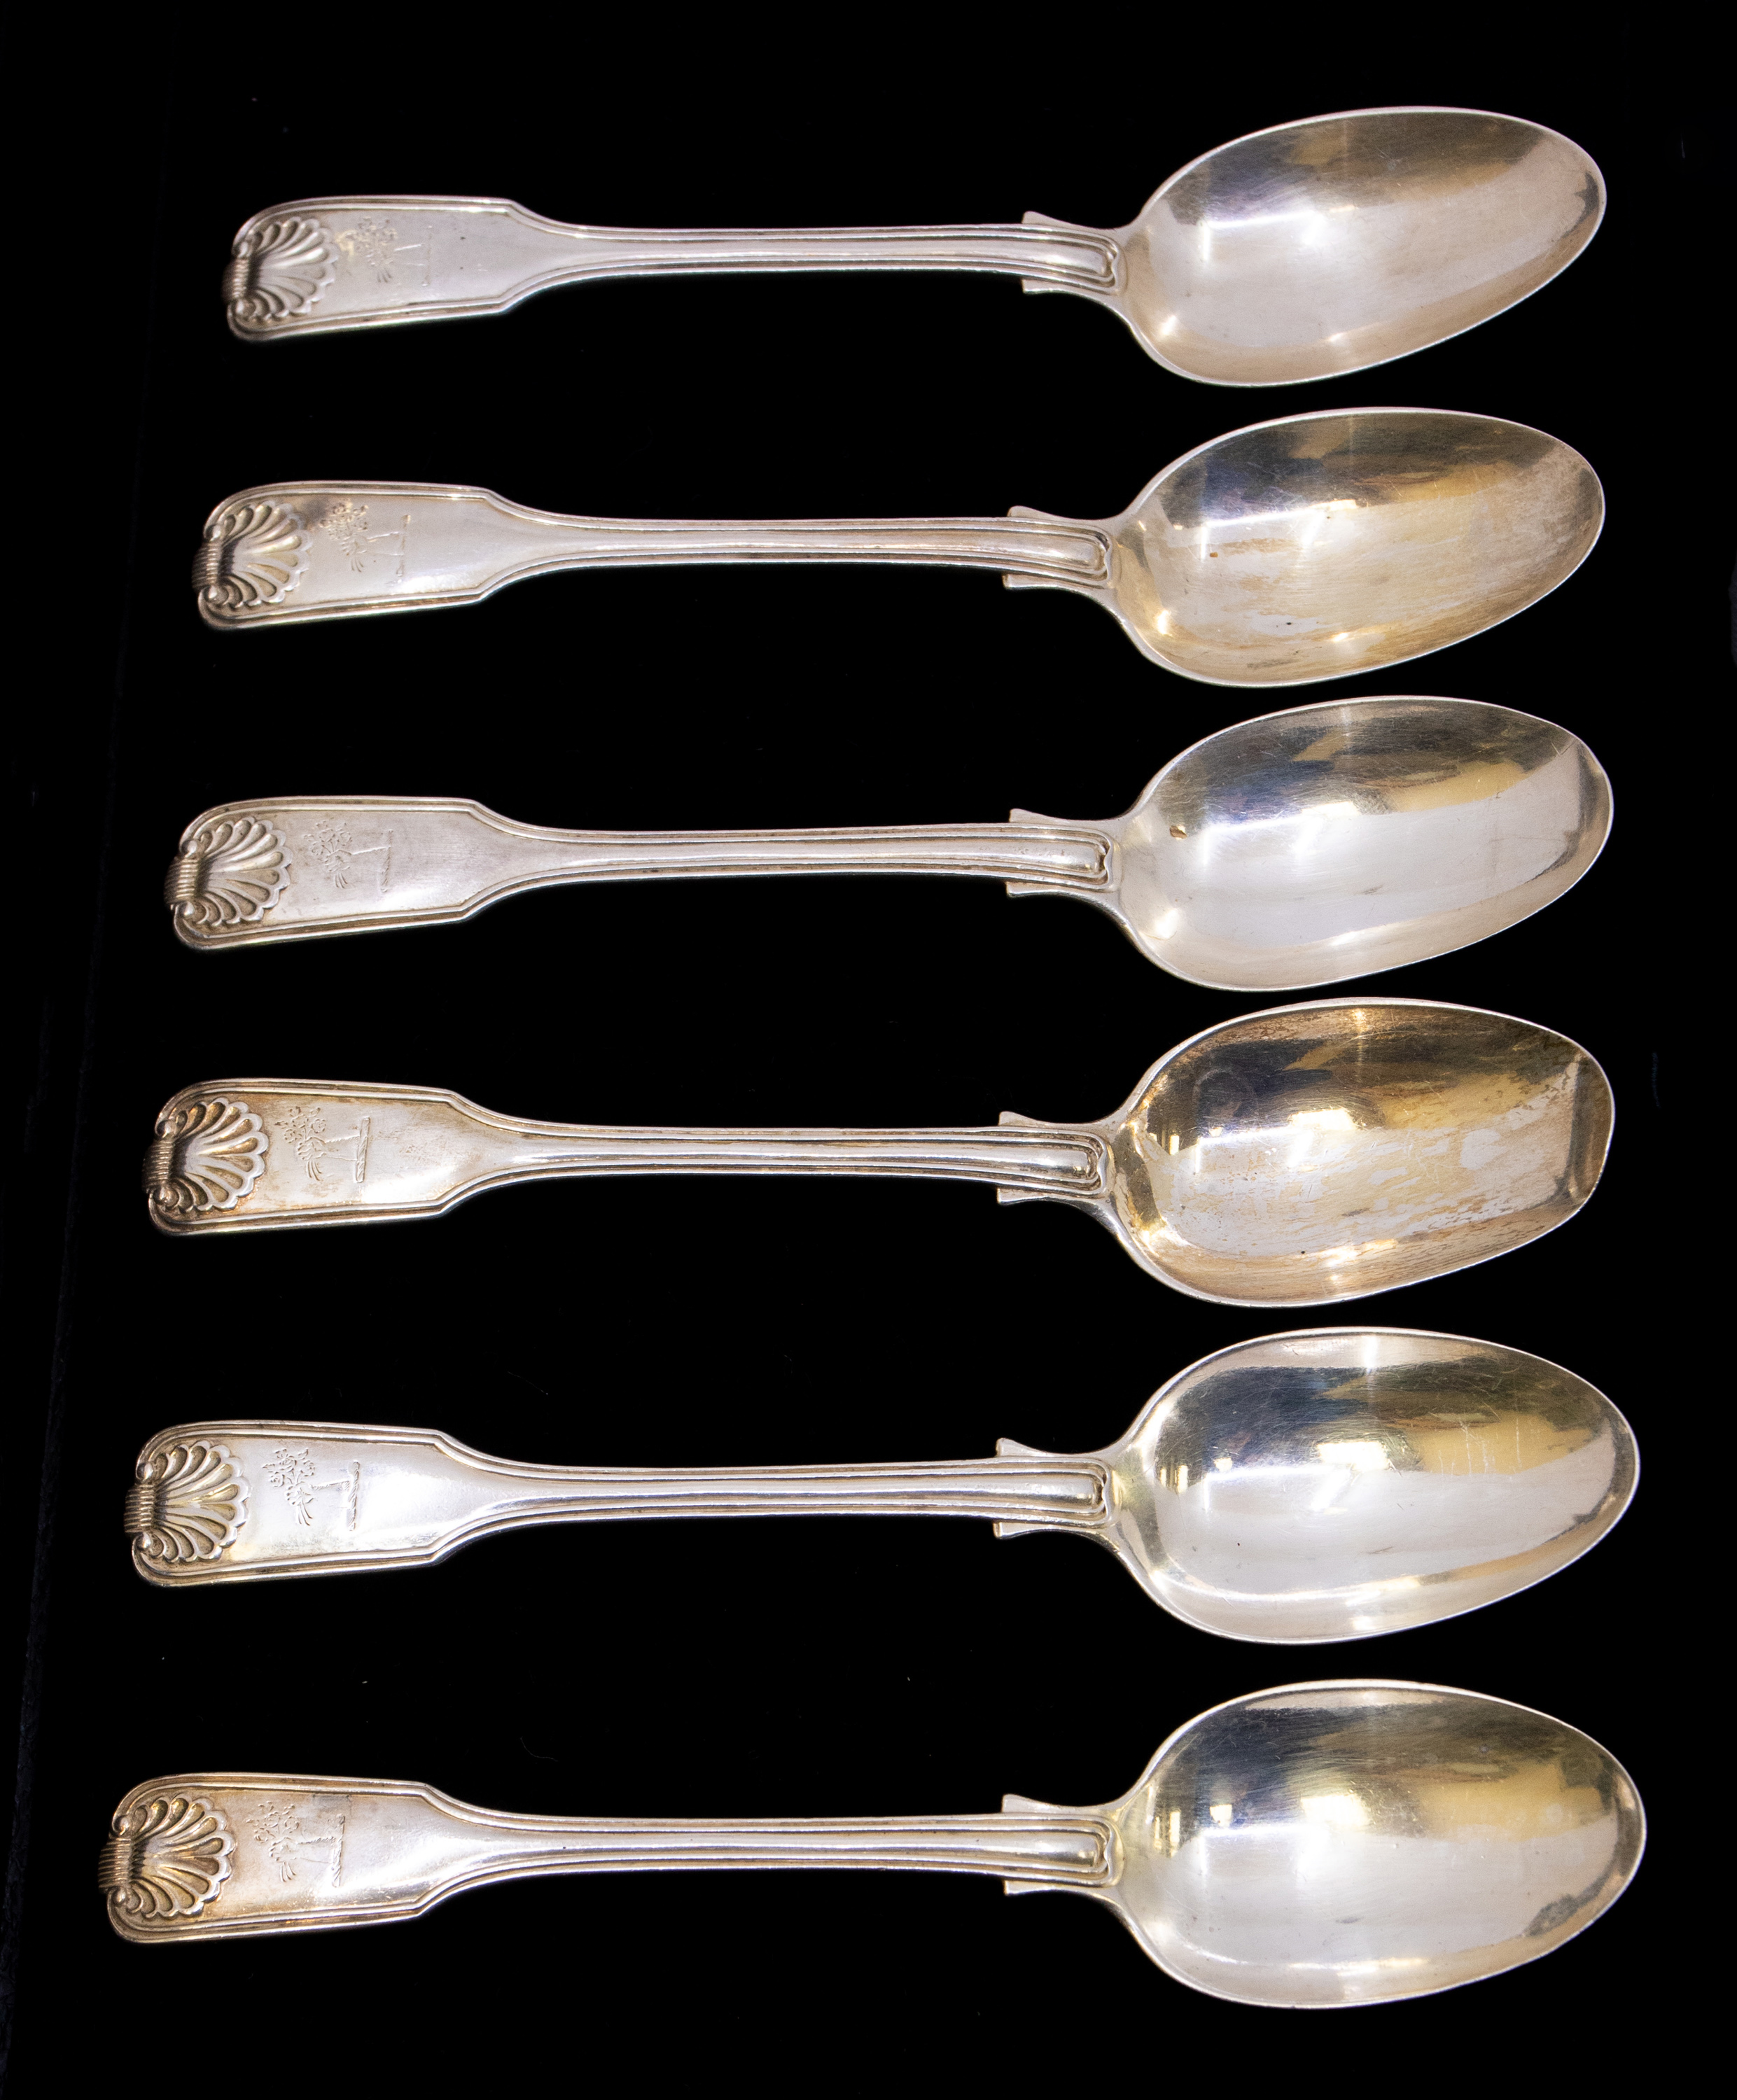 A set of six Victorian silver dessert spoons in the fiddle, thread and shell pattern, each